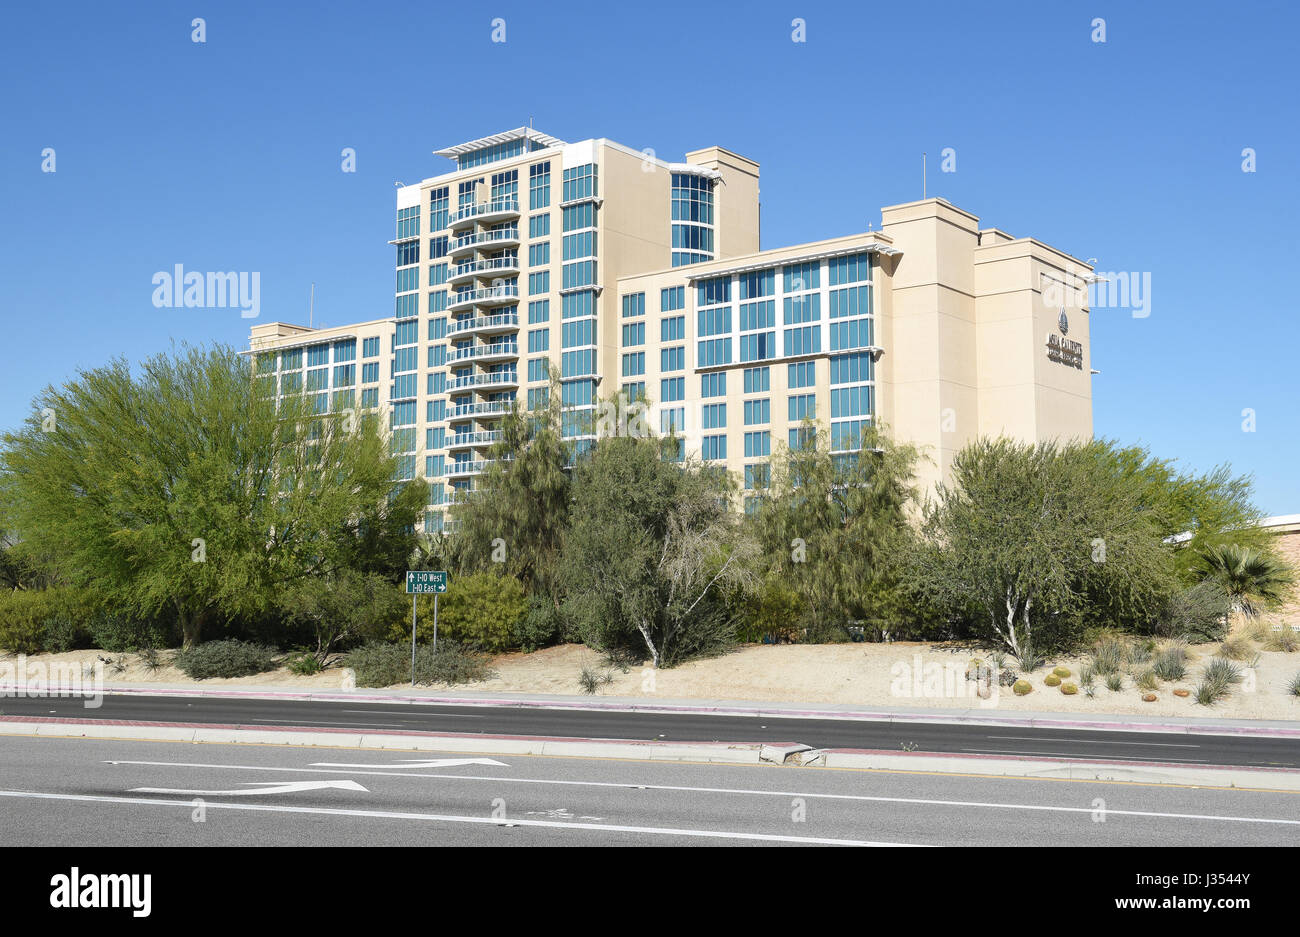 PALM SPRINGS, CA - MARCH 24, 2017: The Agua Caliente Casino Resort Spa seen from Bob Hope Drive. Stock Photo